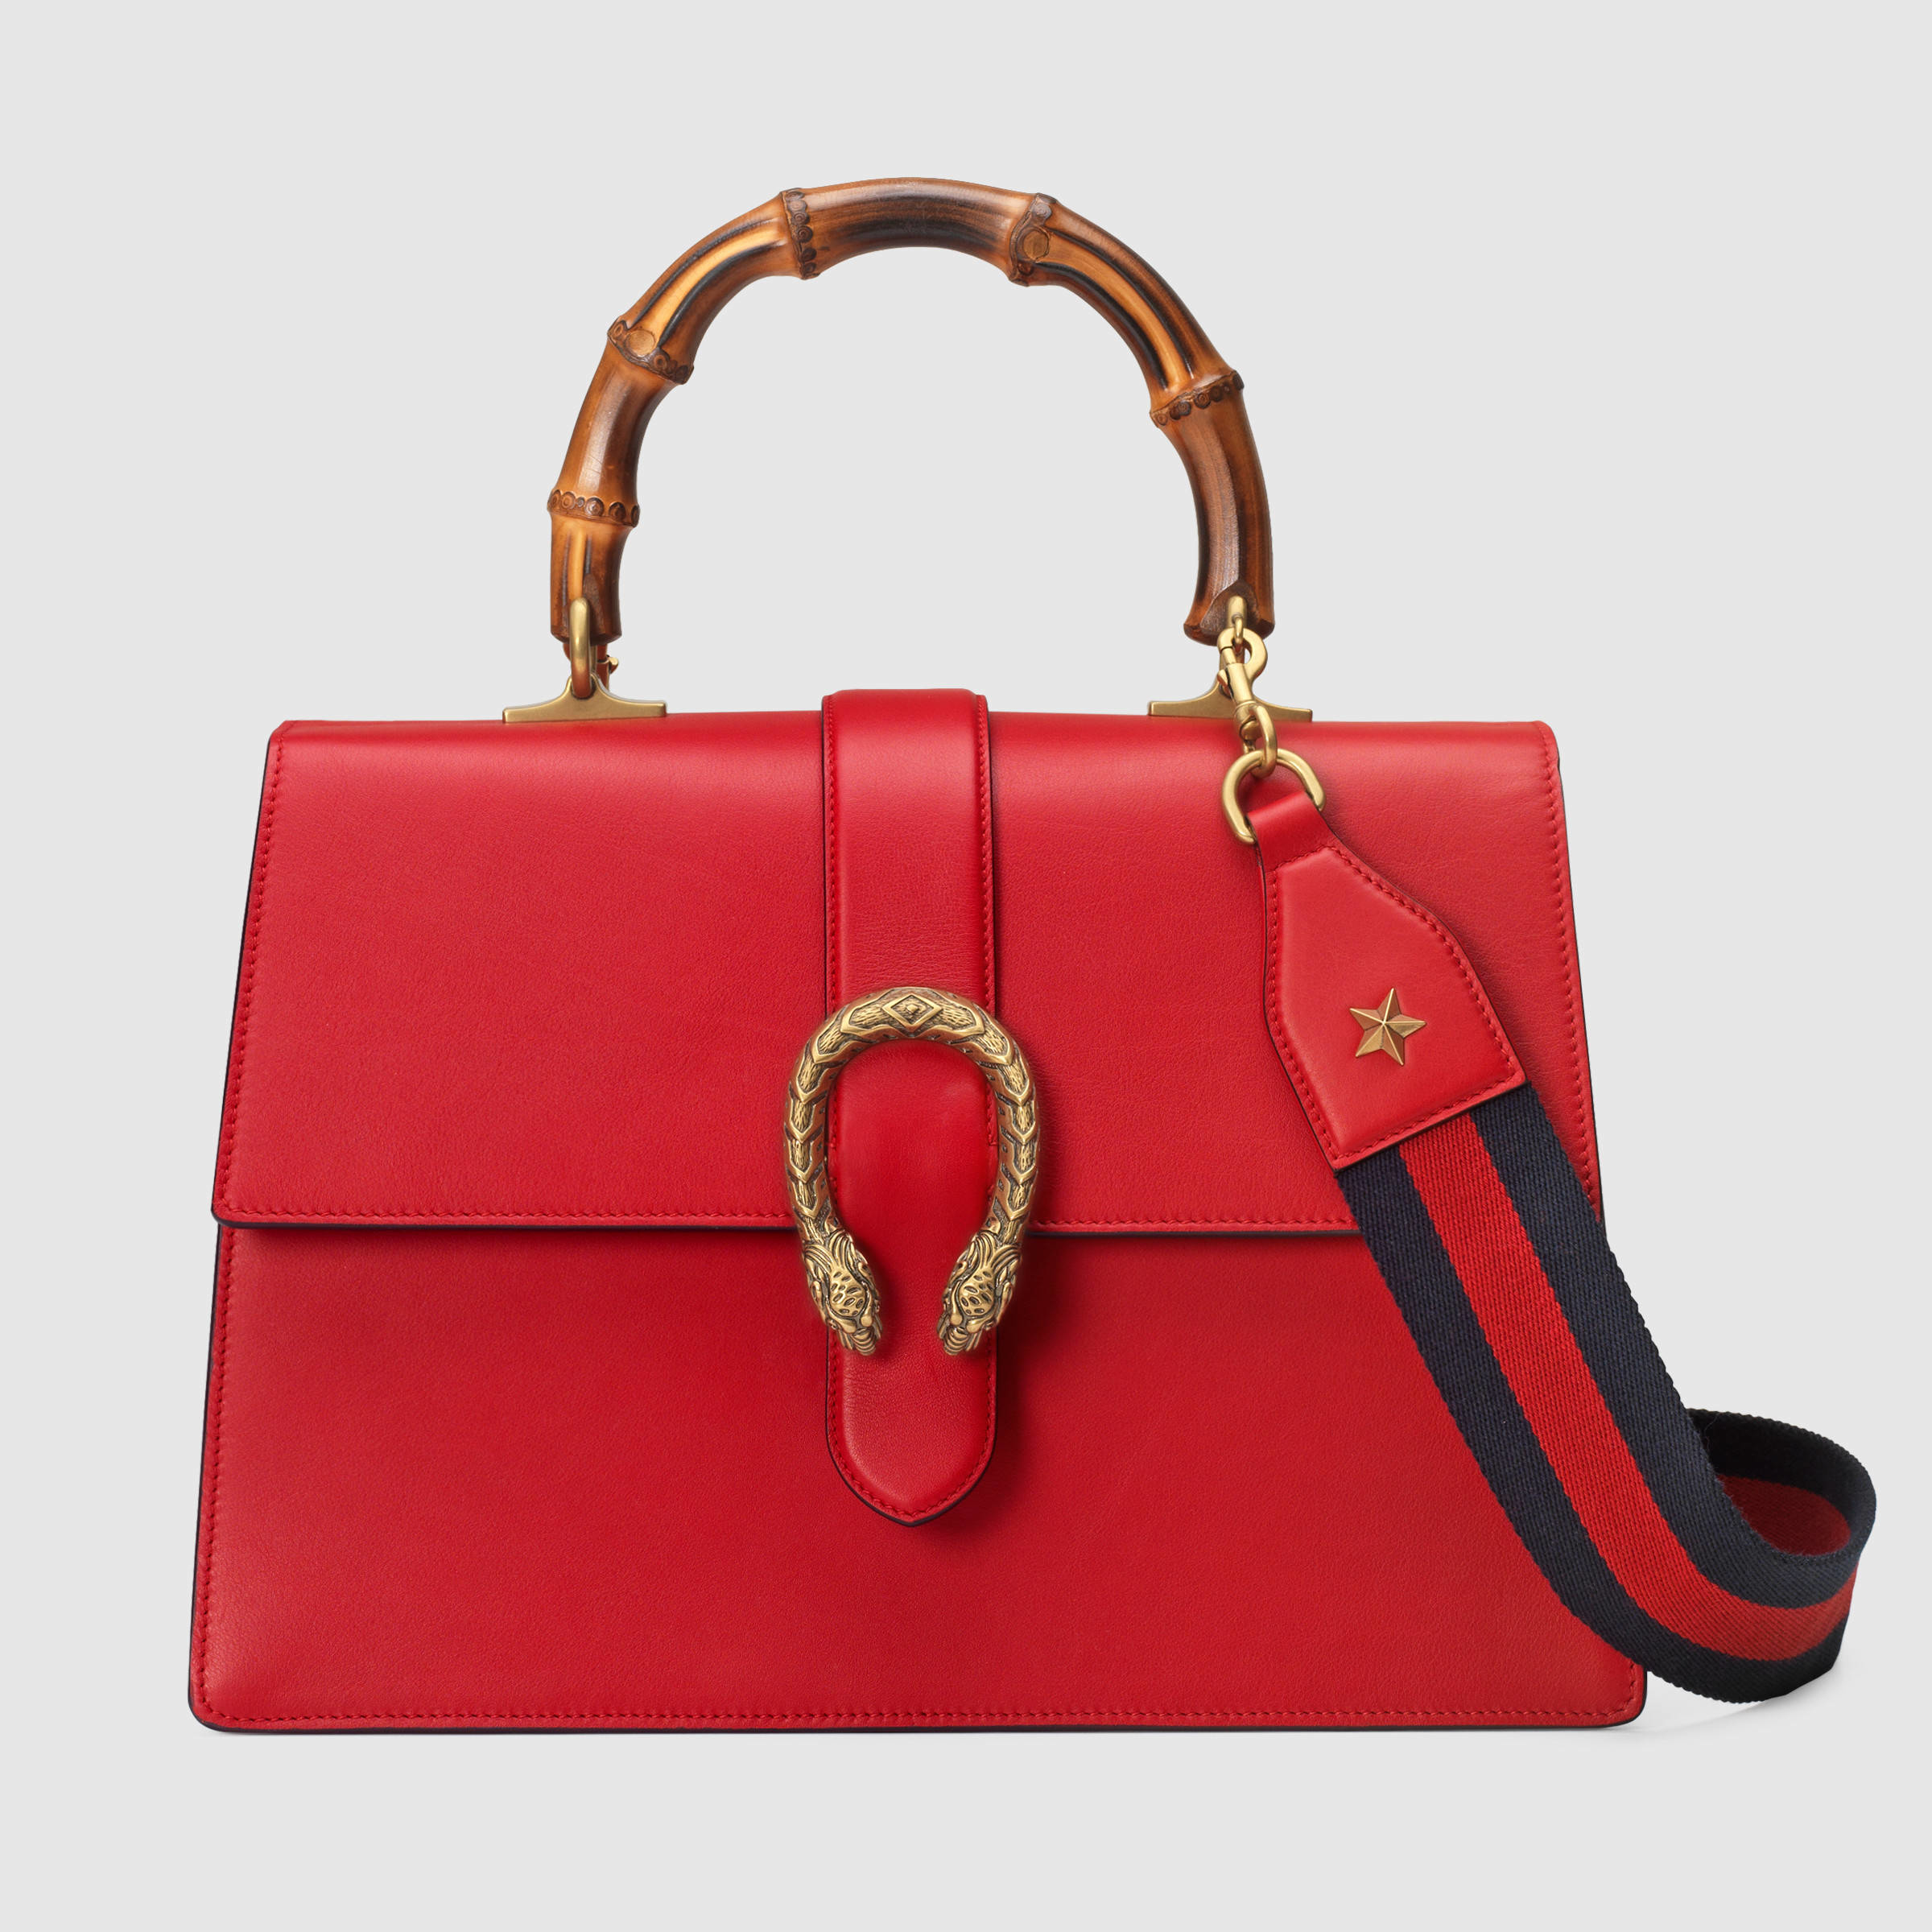 Gucci Dionysus Leather Top Handle Bag in Red | Lyst